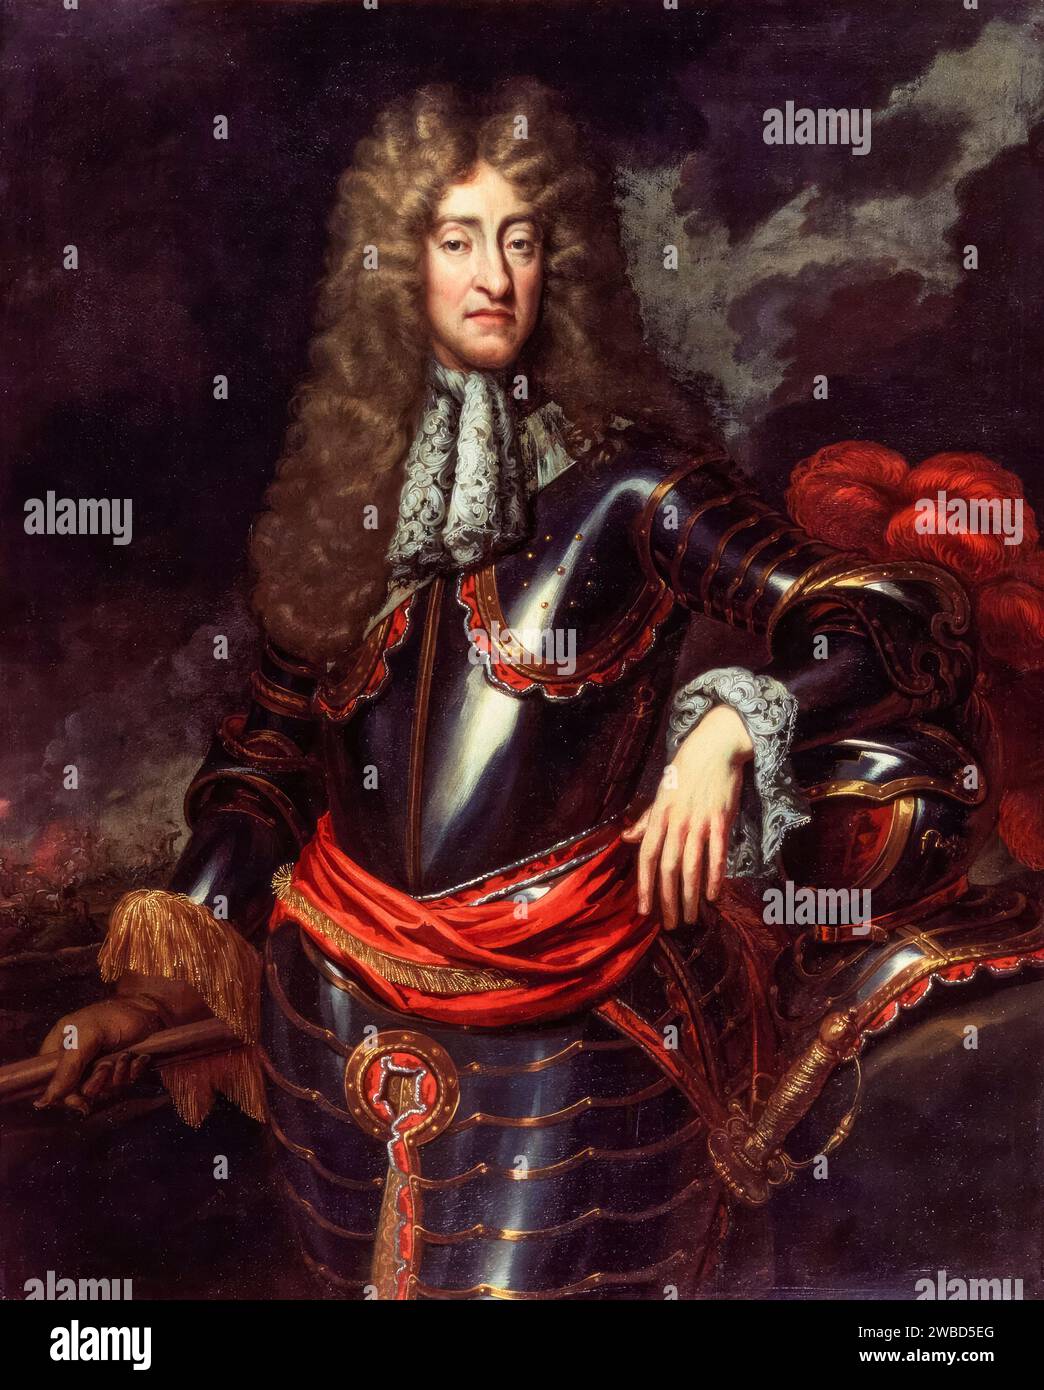 King James II of England and VII of Scotland (1633-1701), reigned 1685-1688, portrait painting in oil on canvas, circa 1690 Stock Photo